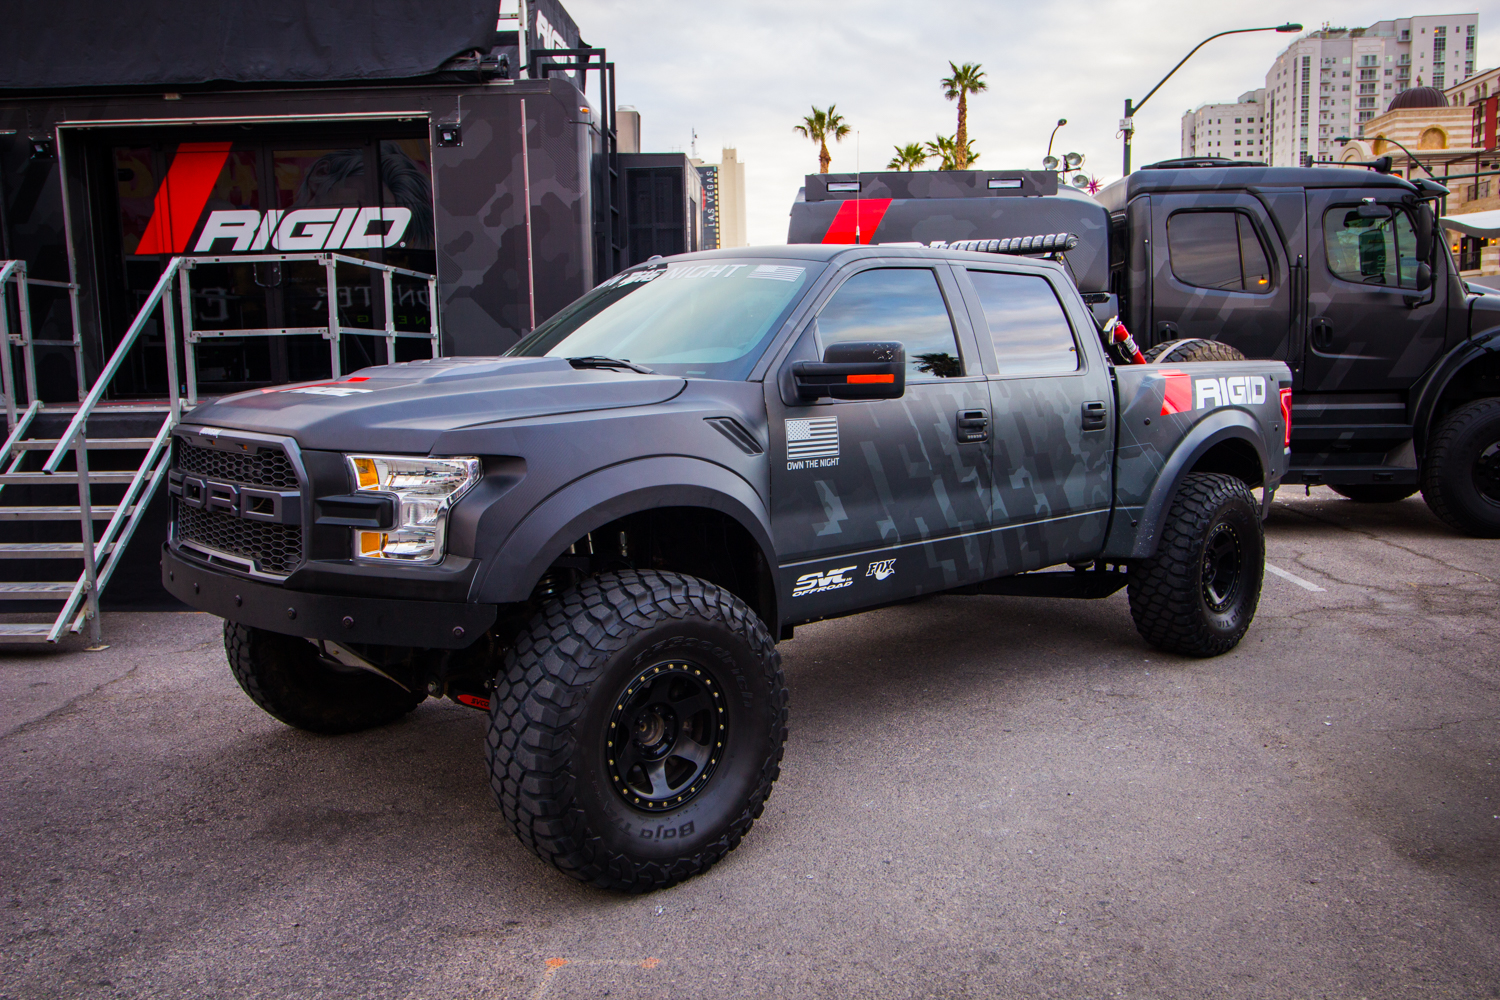 Bigger, Better, Faster: Ford Trucks at the Mint 400